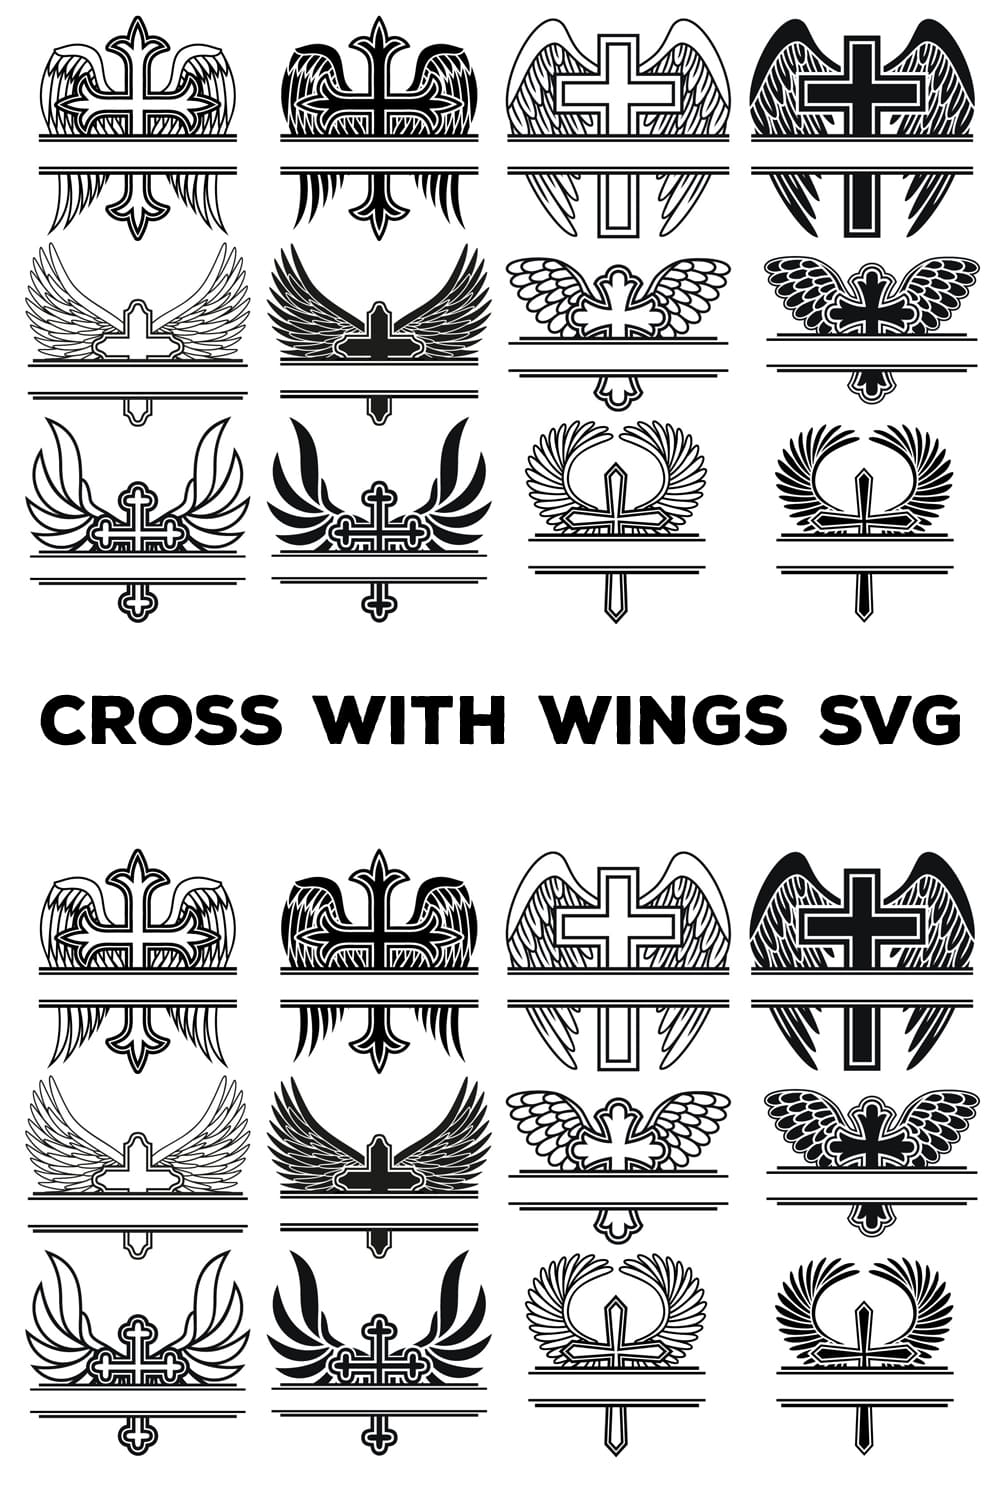 Cross with wings svg - pinterest image preview.